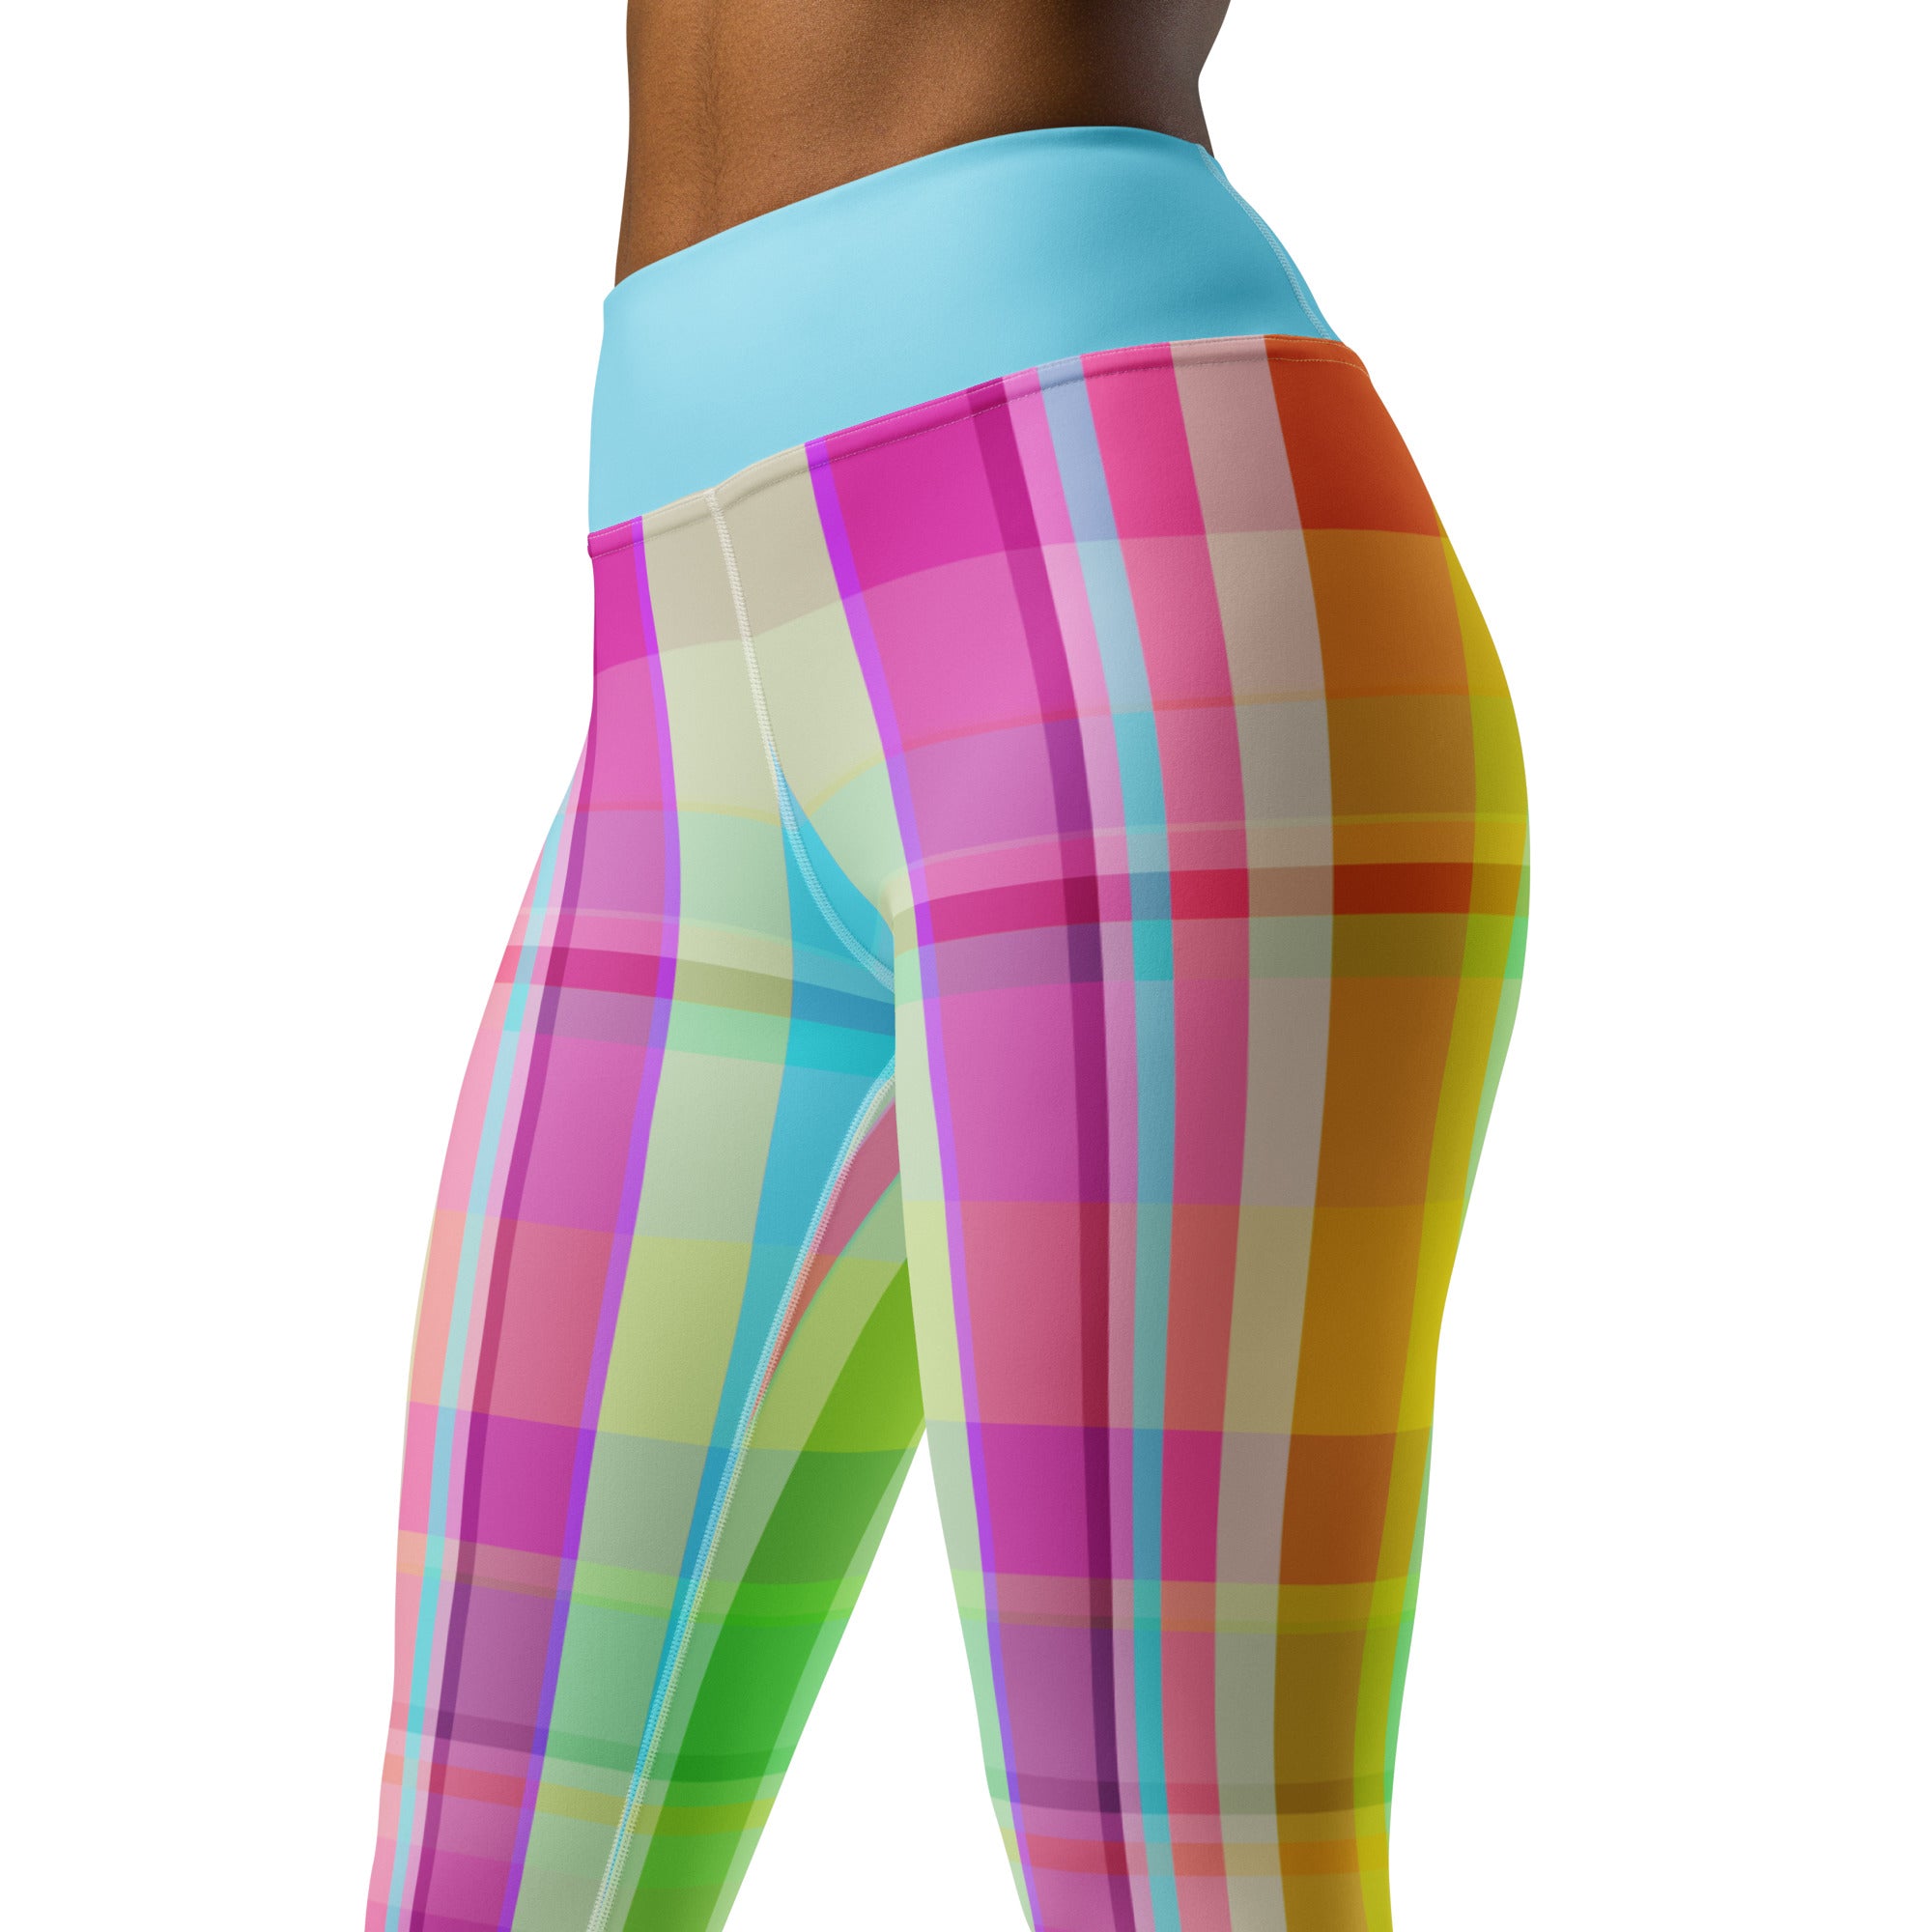 Vibrant Electric Sunrise Yoga Leggings, capturing the beauty of dawn for an uplifting practice.